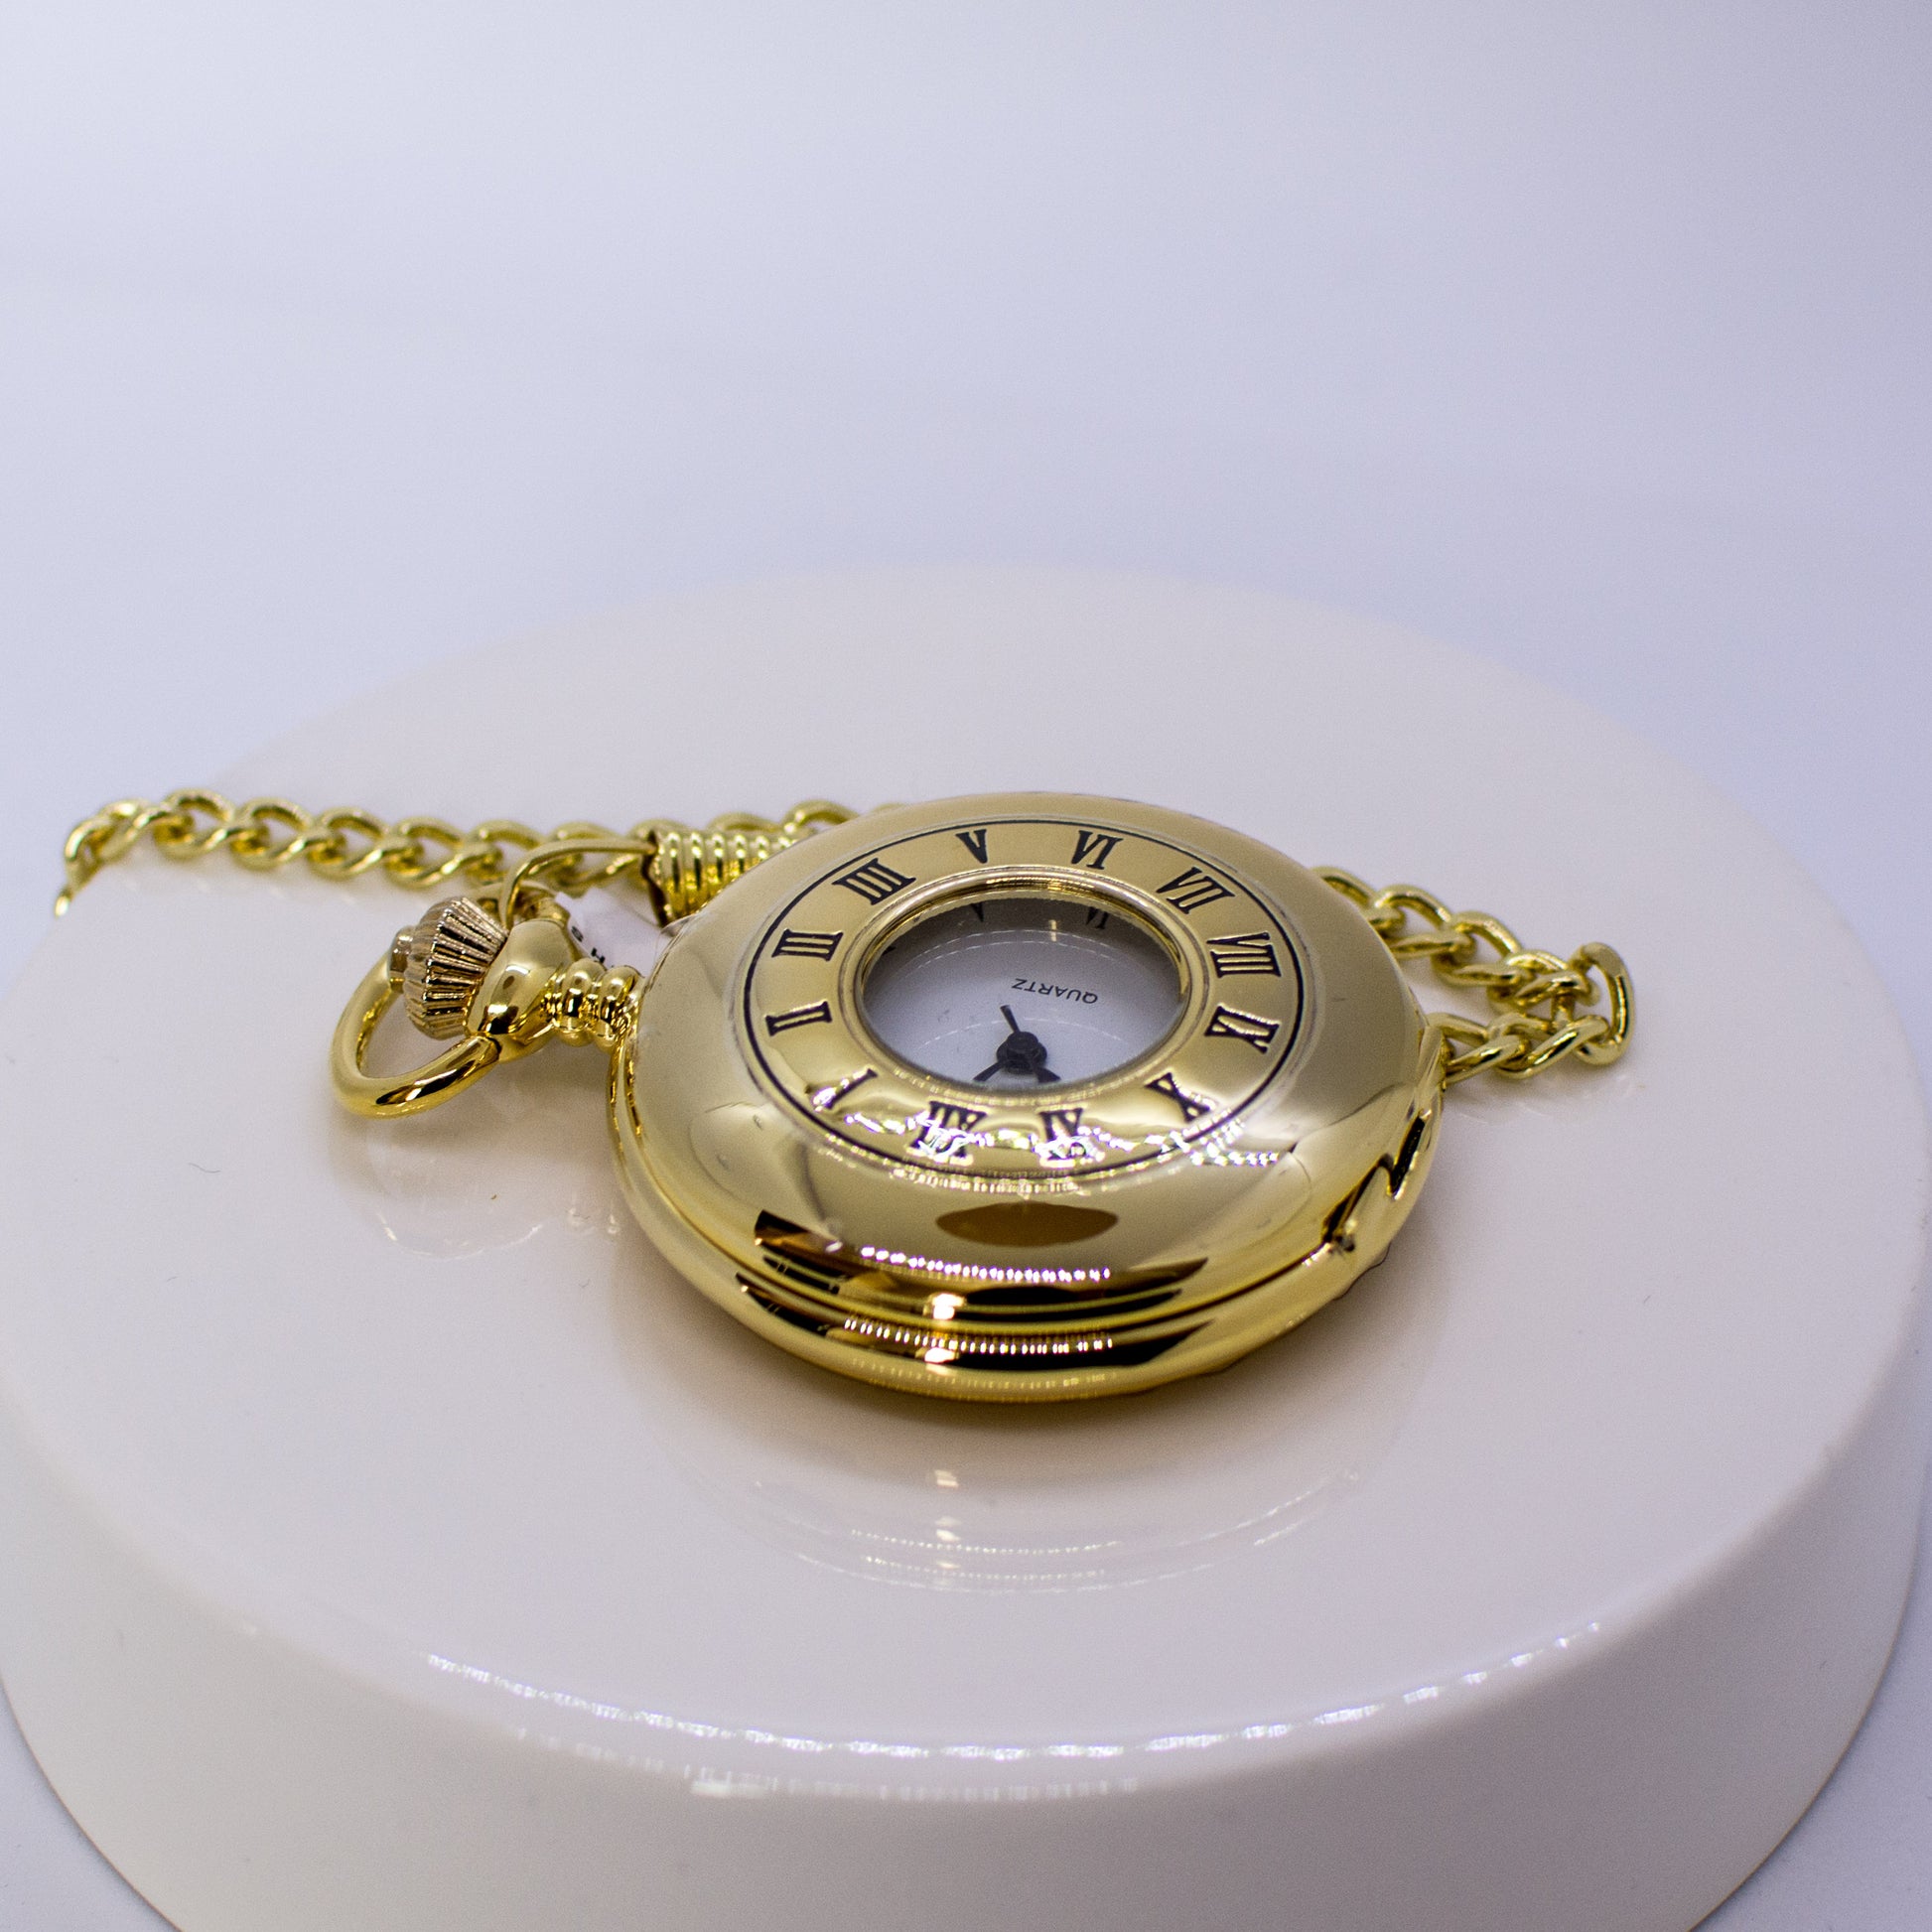 Gold Half Hunter Pocket Watch with Stand - John Ross Jewellers